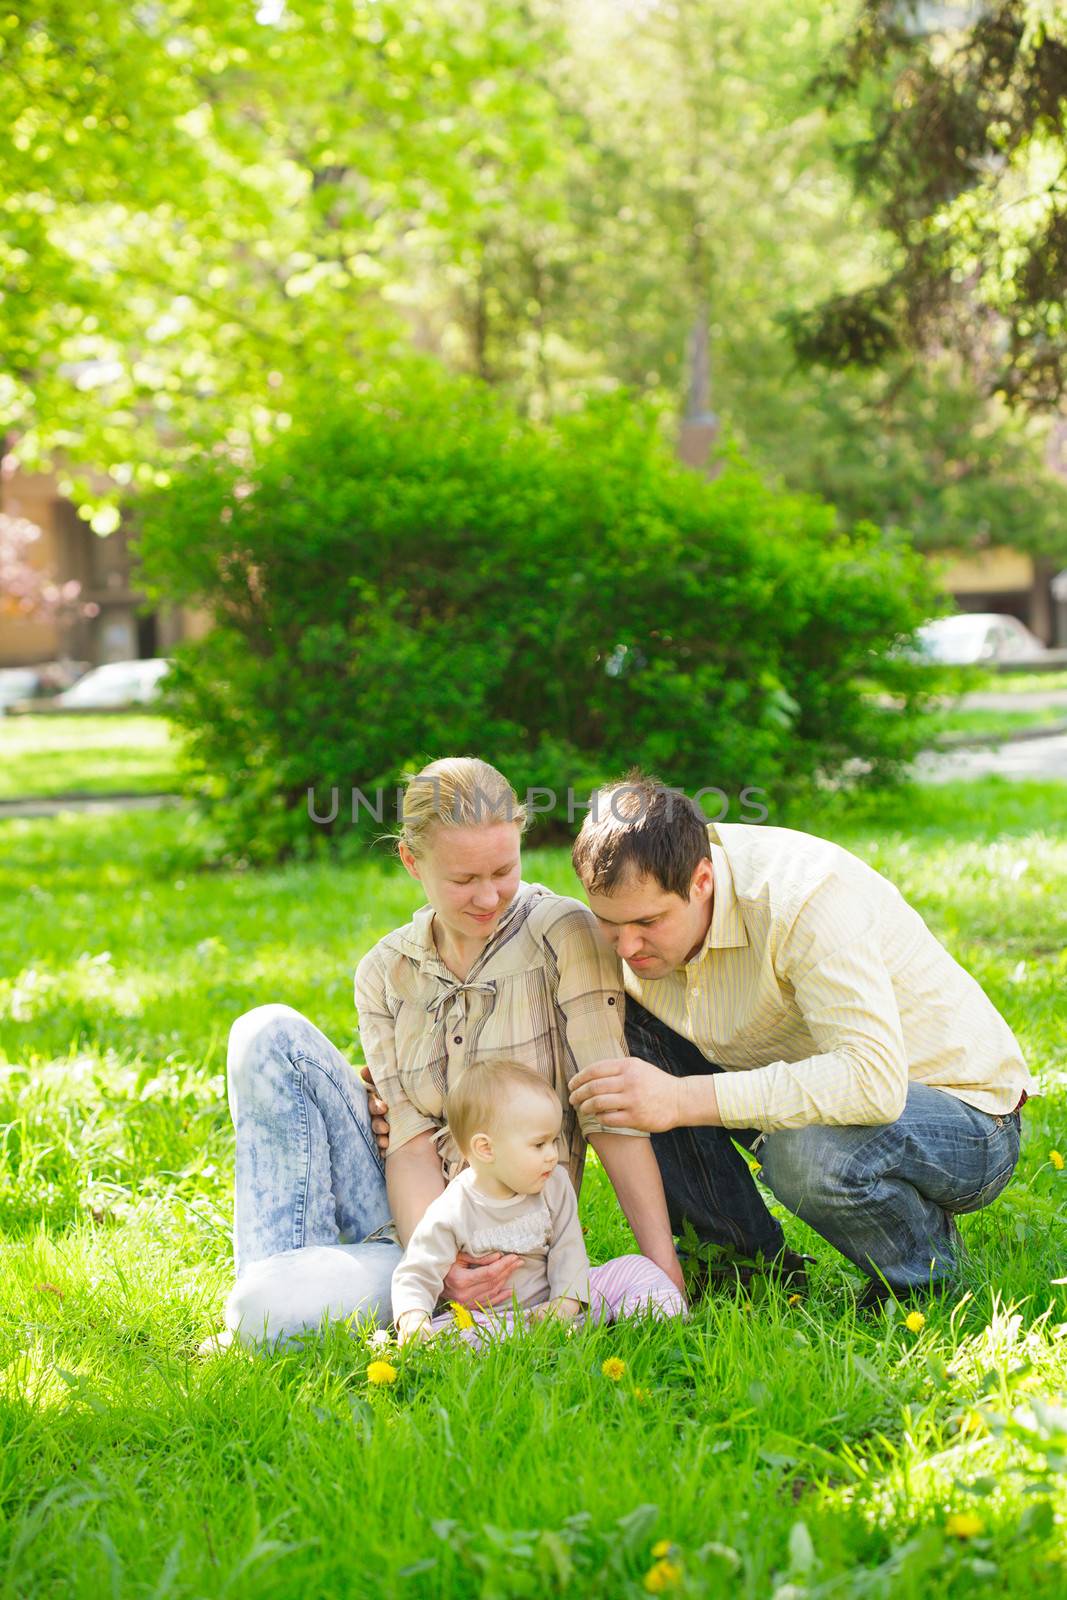 Family with child play in the park on green grass